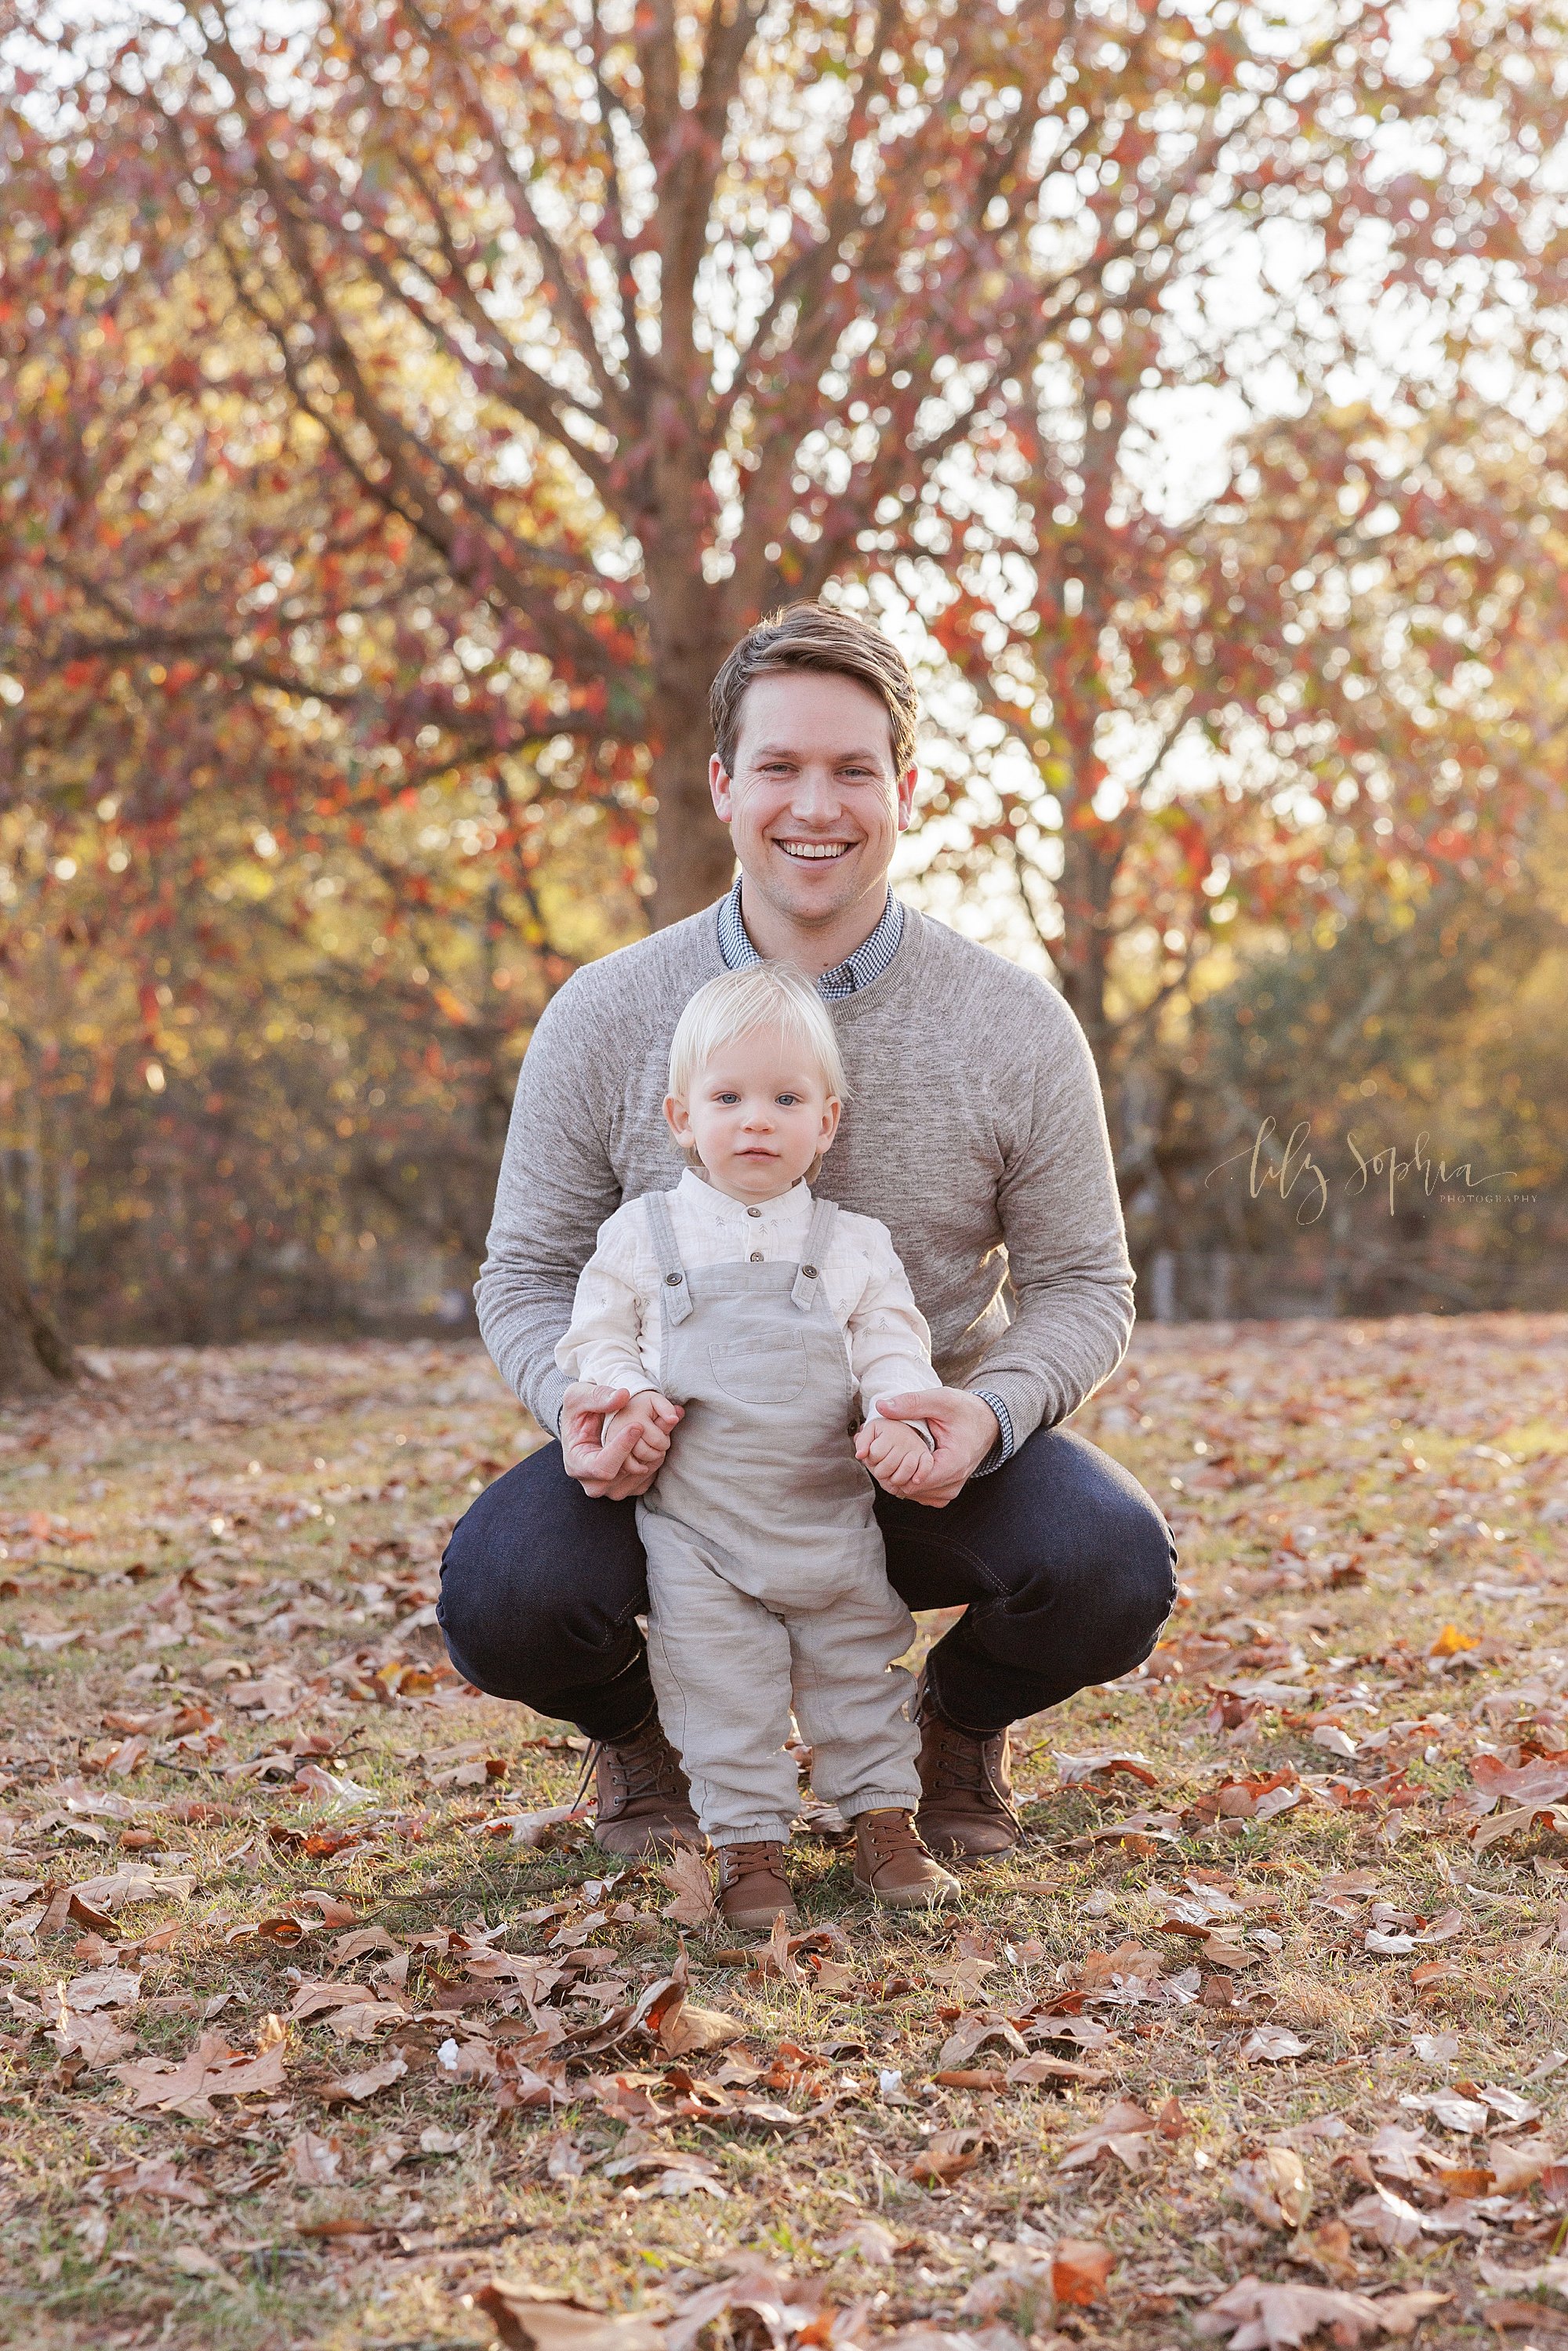  Father and son portrait with dad squatting behind his toddler son and holding his hands in a park carpeted with autumn leaves near Atlanta, Georgia at sunset. 